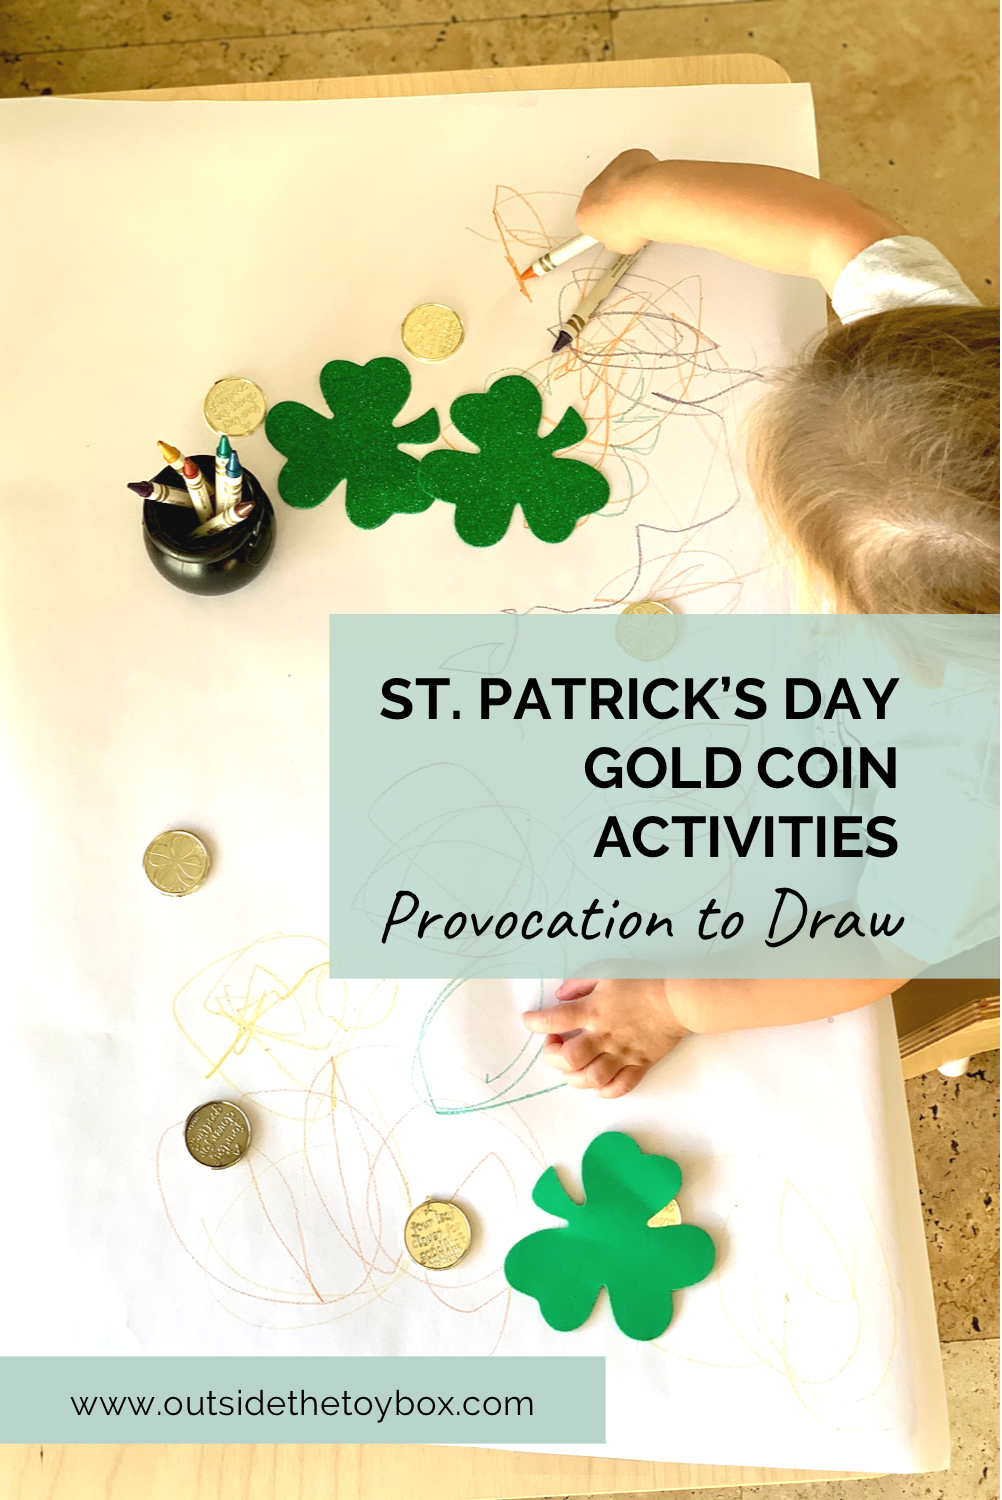 Toddler drawing with crayons with Shamrocks and gold coins on paper